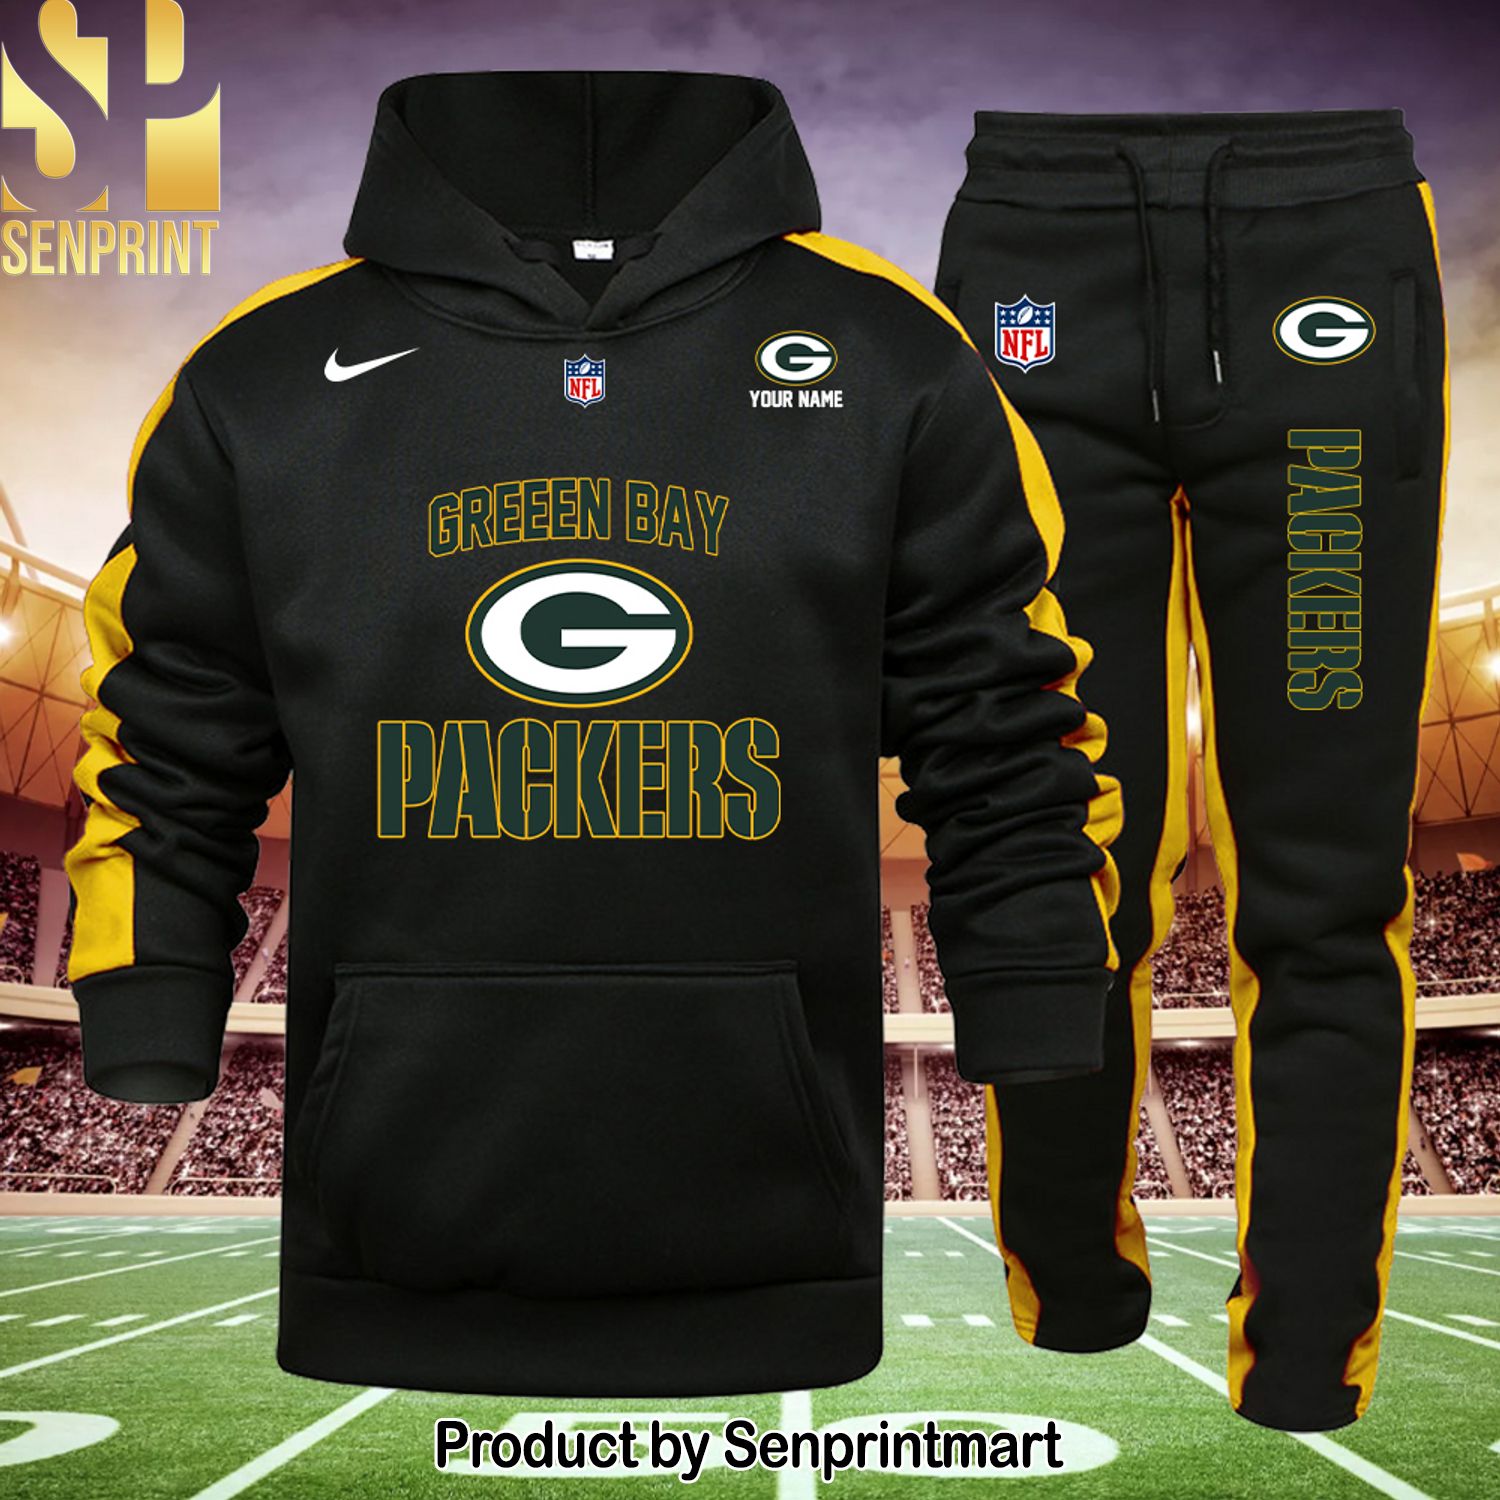 NFL Green Bay Packers Best Combo Full Printing Shirt and Sweatpants